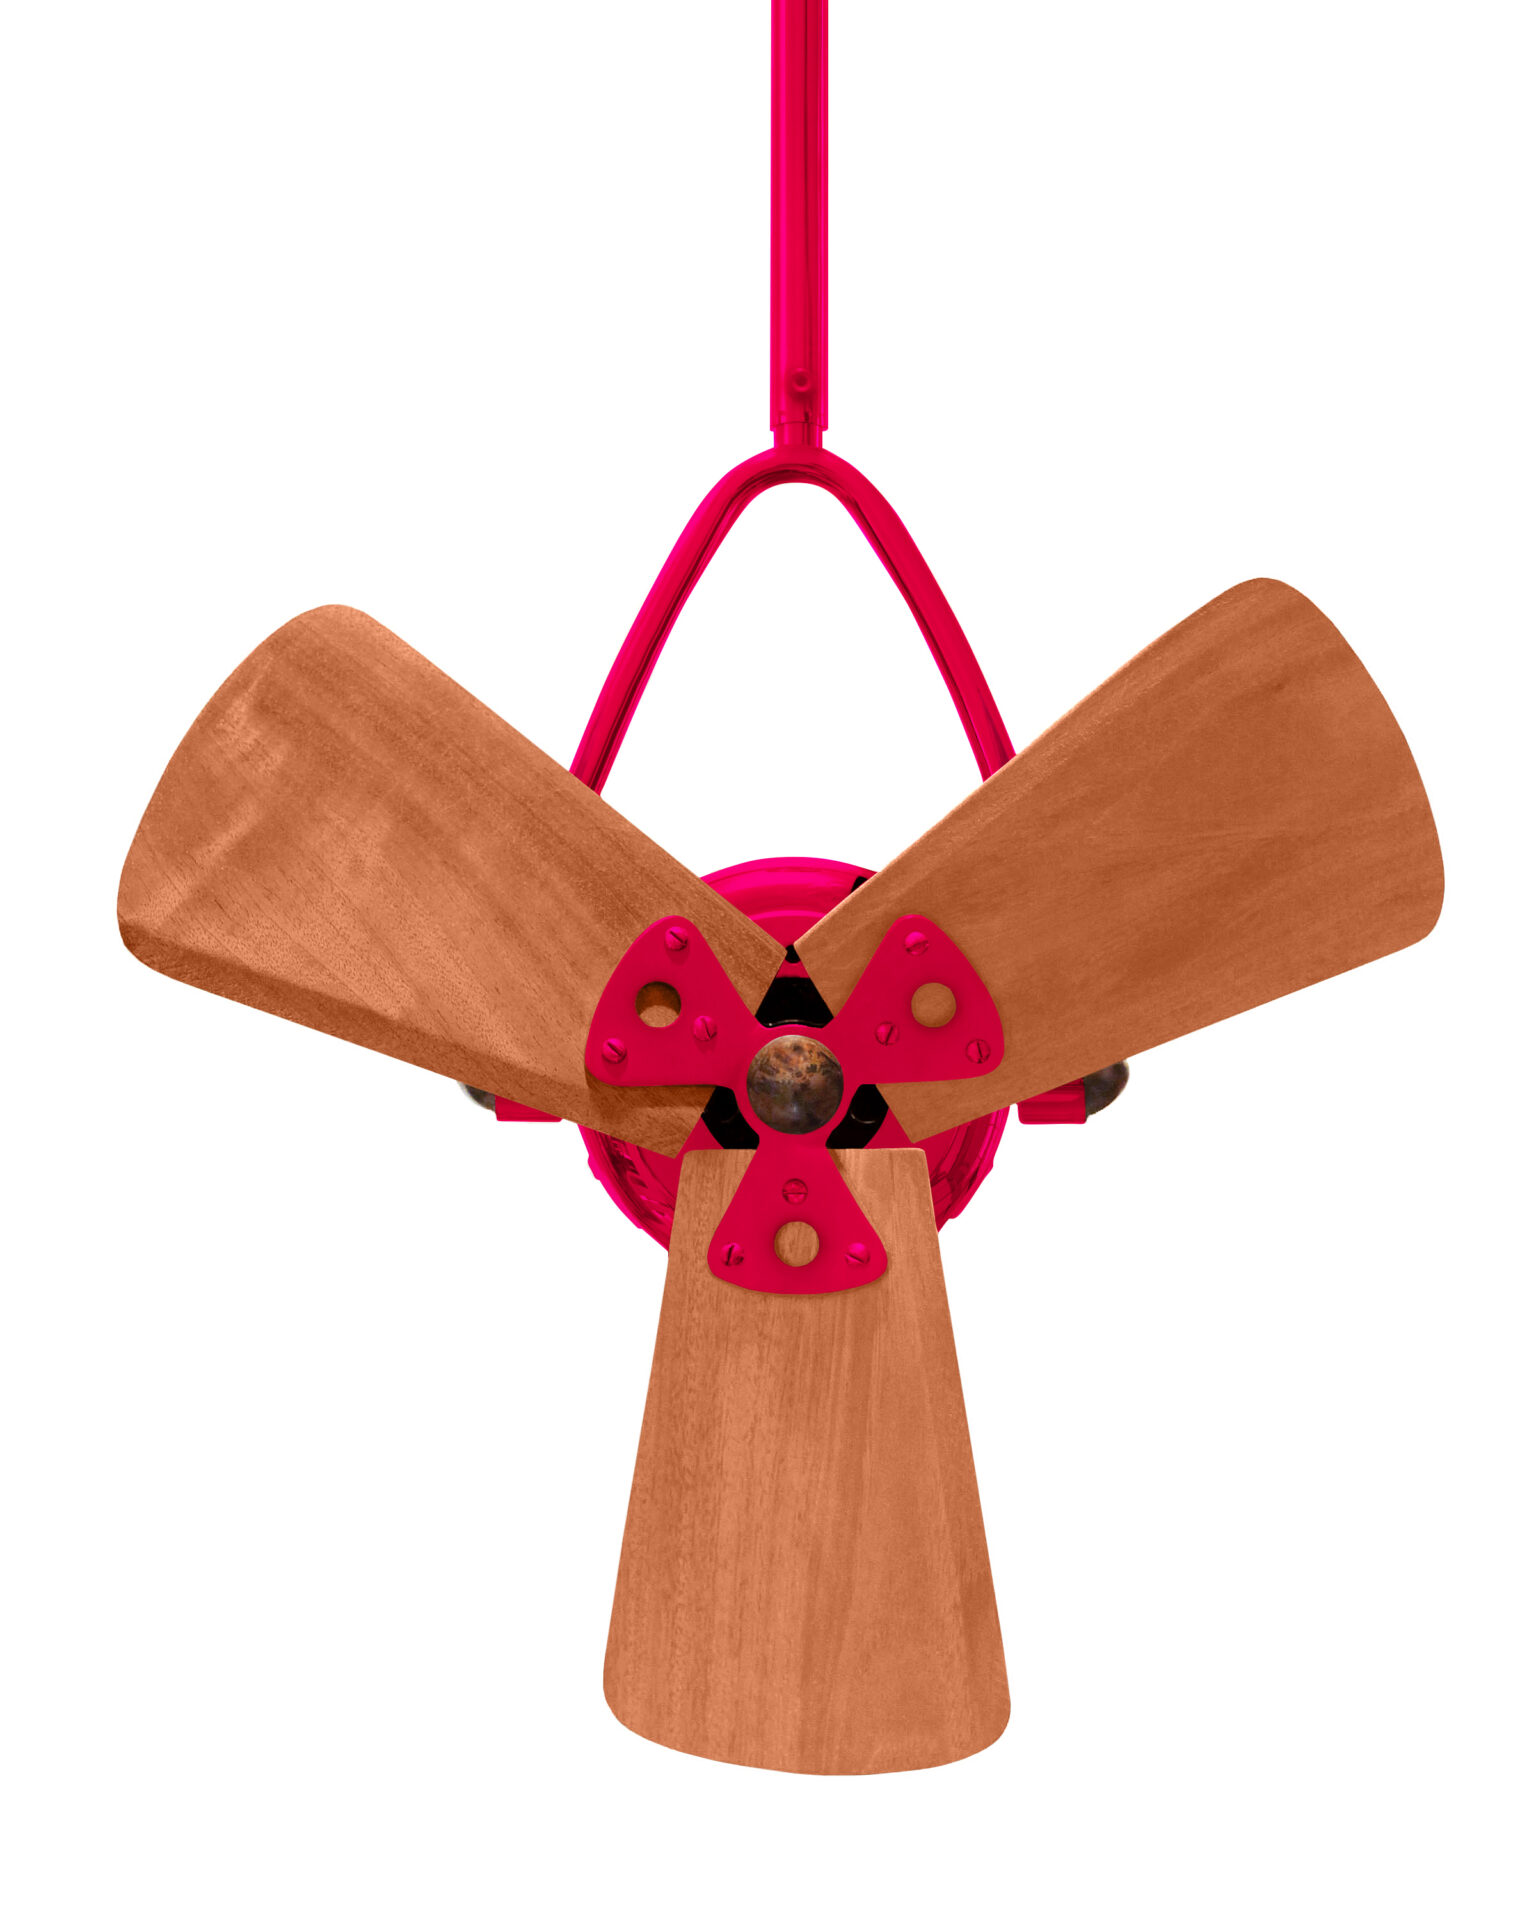 Jarold Direcional ceiling fan in red / rubi finish with solid mahogany wood blades made by Matthews Fan Company.